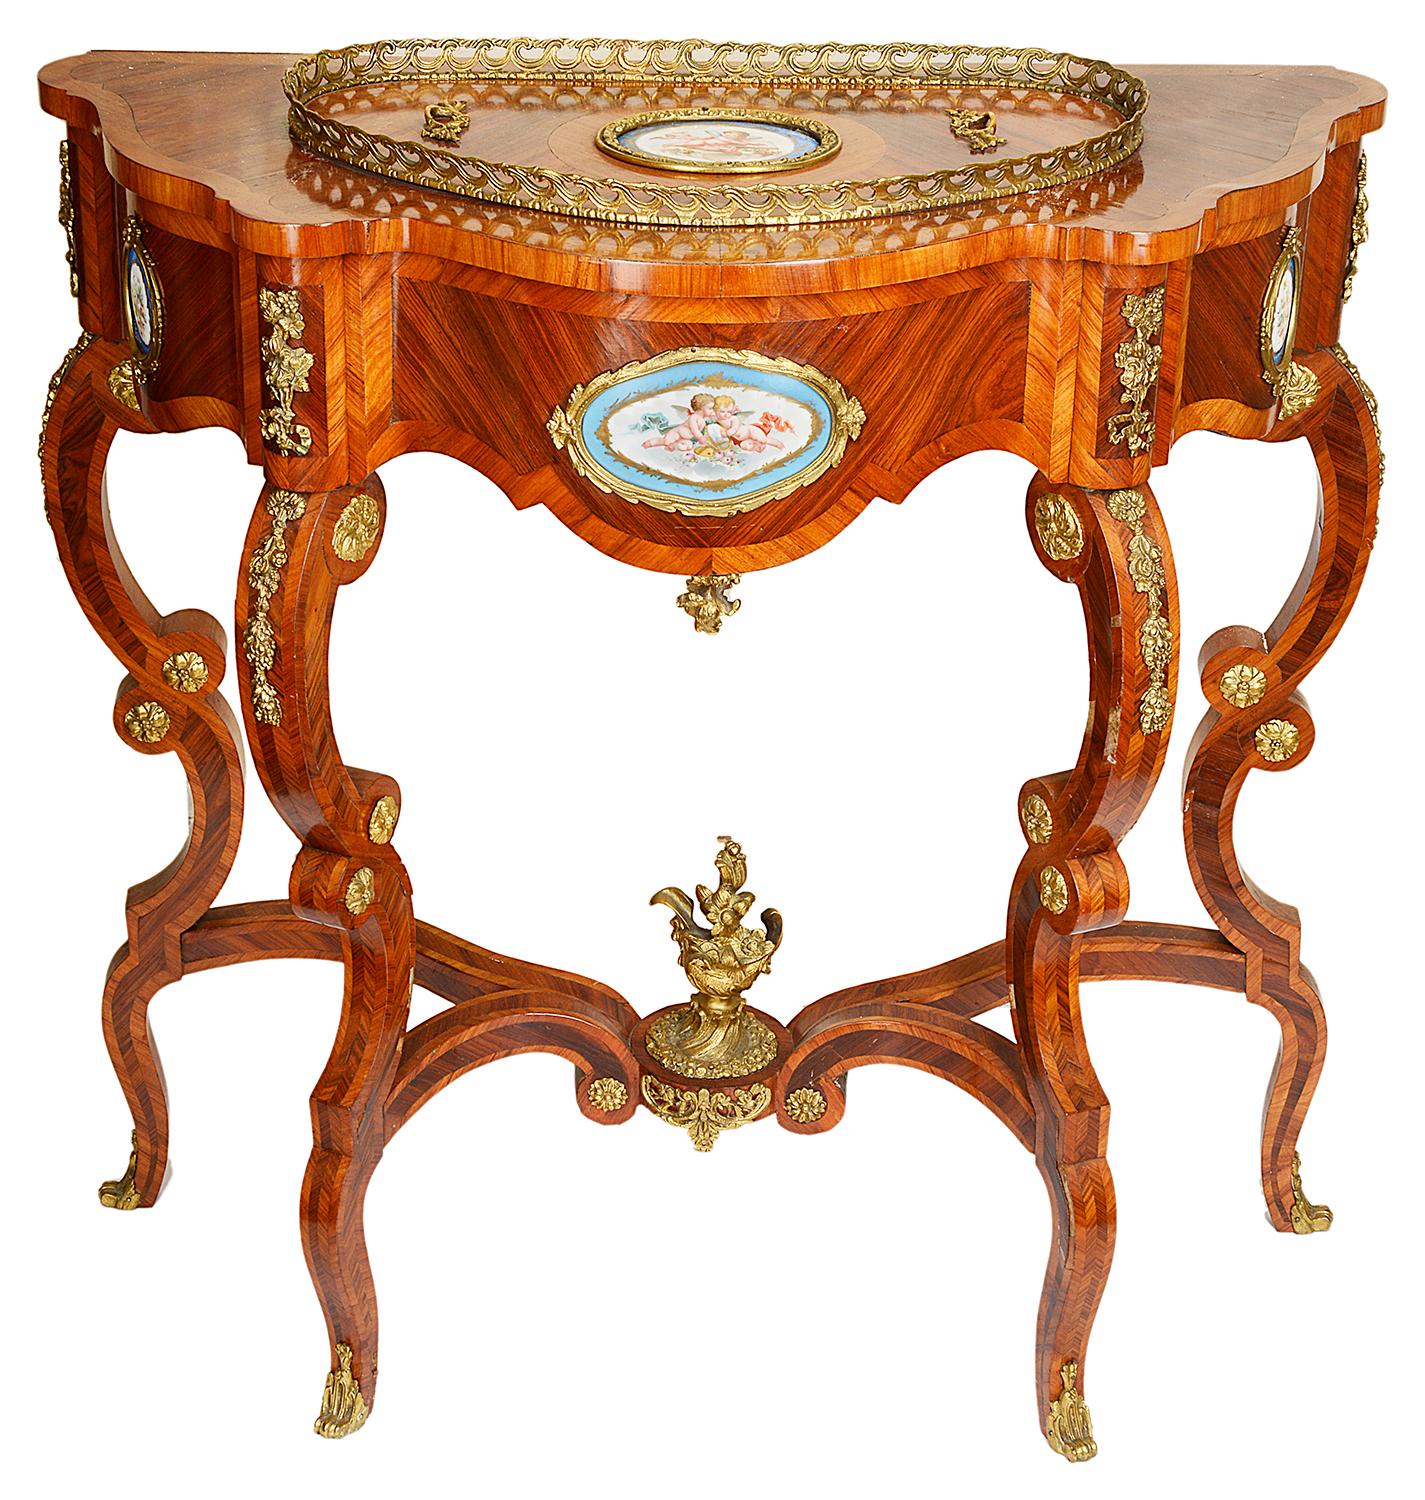 A striking pair of French late 19th century console / jardinière tables, each with gilded ormolu gallery and mounts, Sevres style porcelain plaques, united by an under tier stretcher and raised on elegant scrolling cabriole legs. The lid to the top